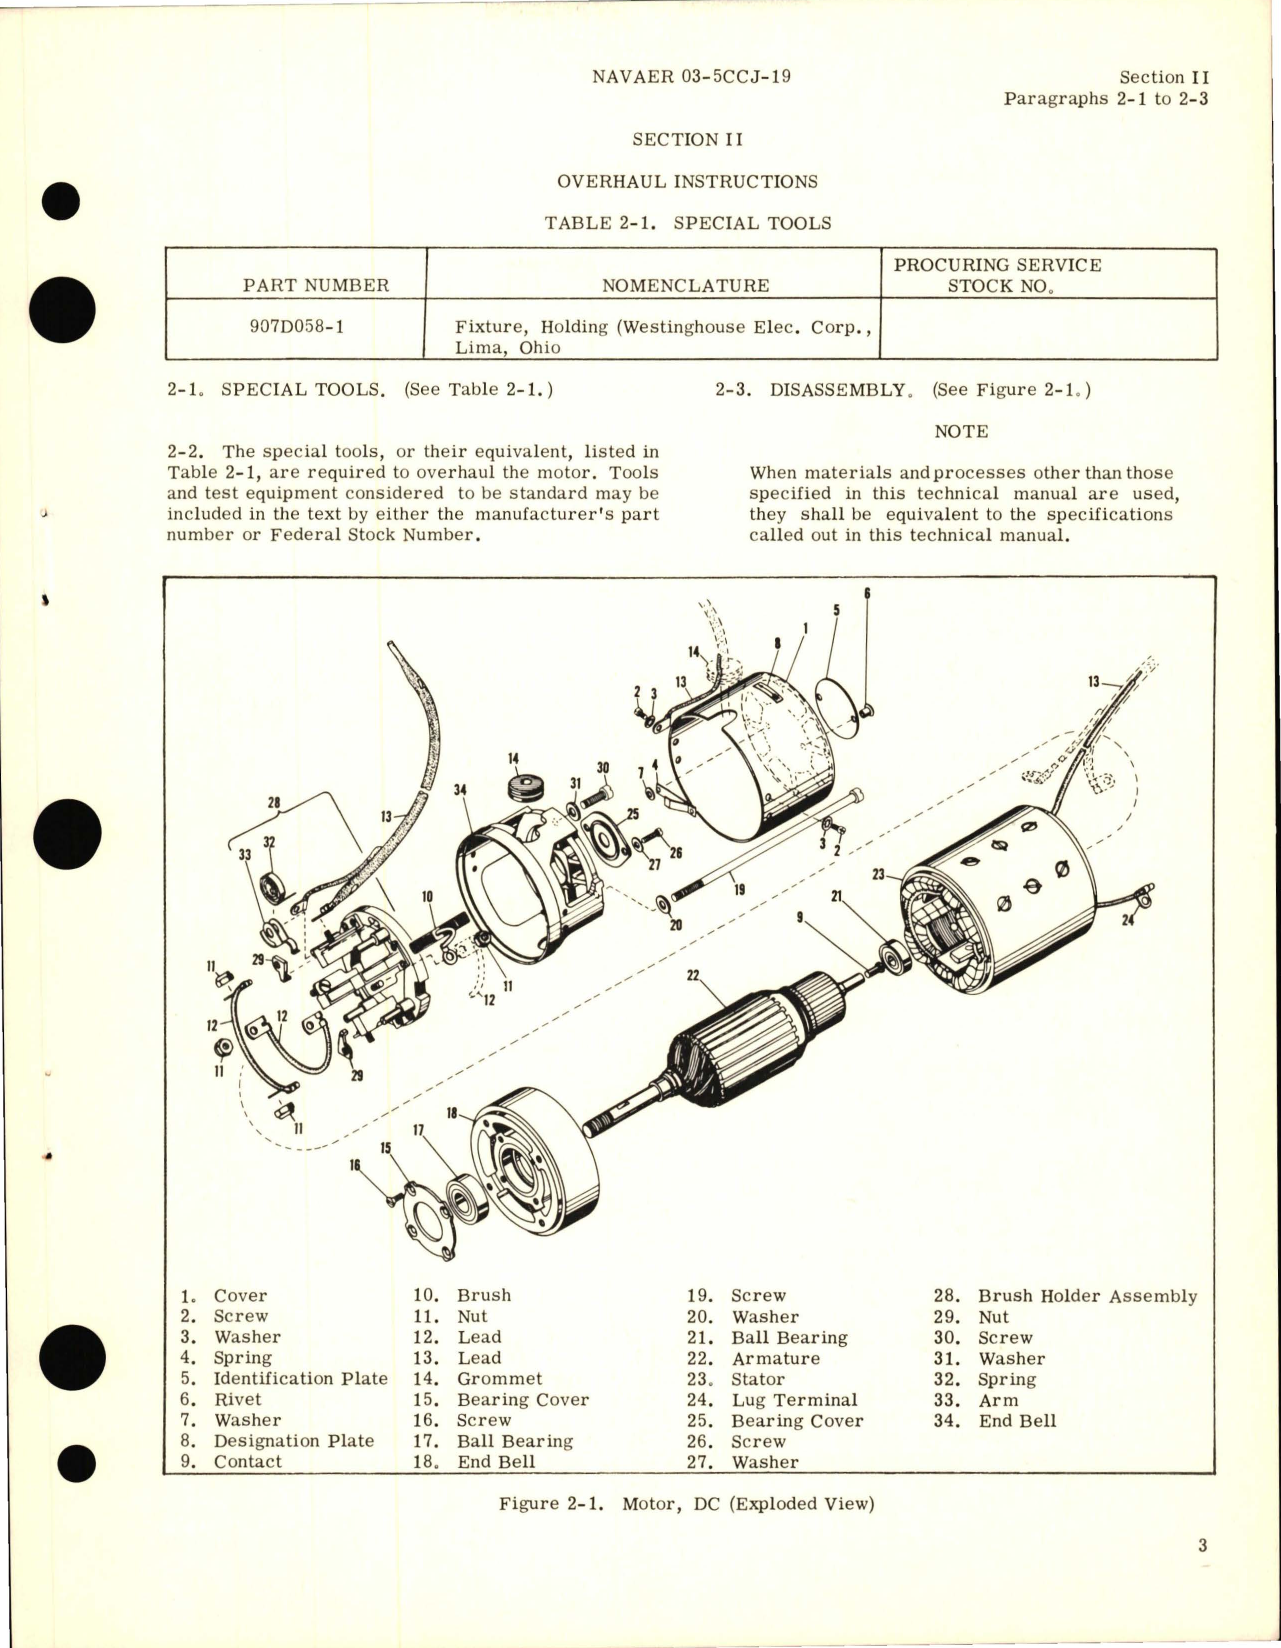 Sample page 7 from AirCorps Library document: Overhaul Instructions for DC Motor - Part 906D068-1